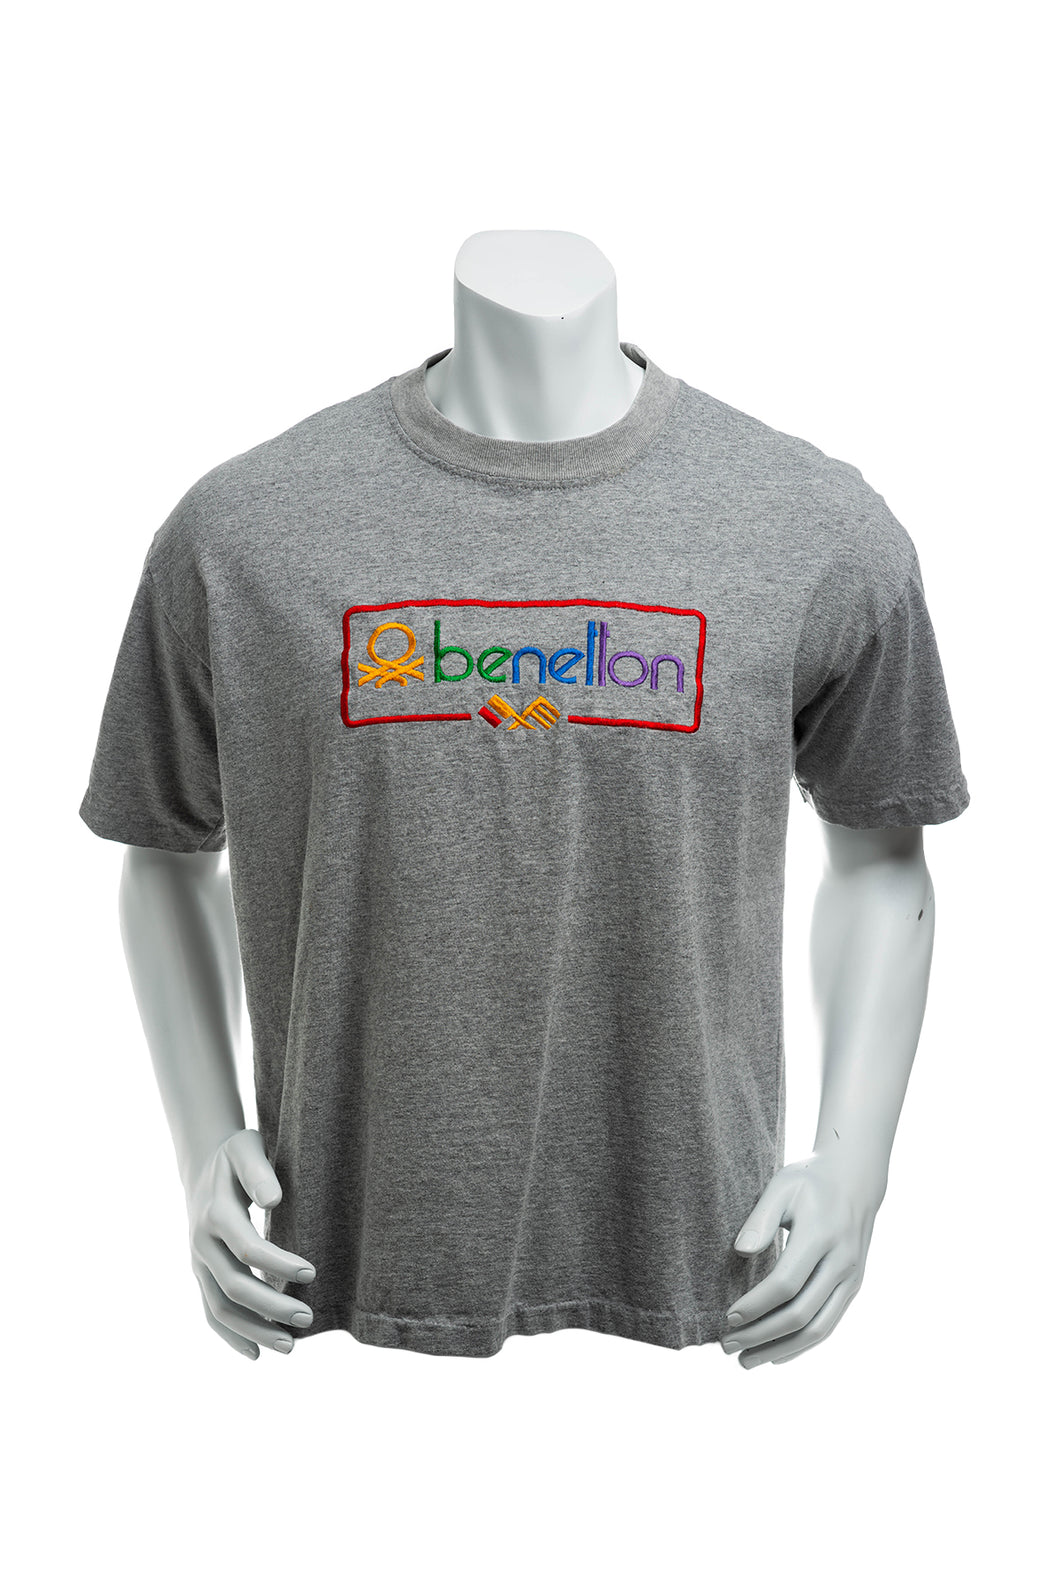 Vintage 80's United Colors of Benetton Embroidered Single Stitch T-Shirt Men's Medium